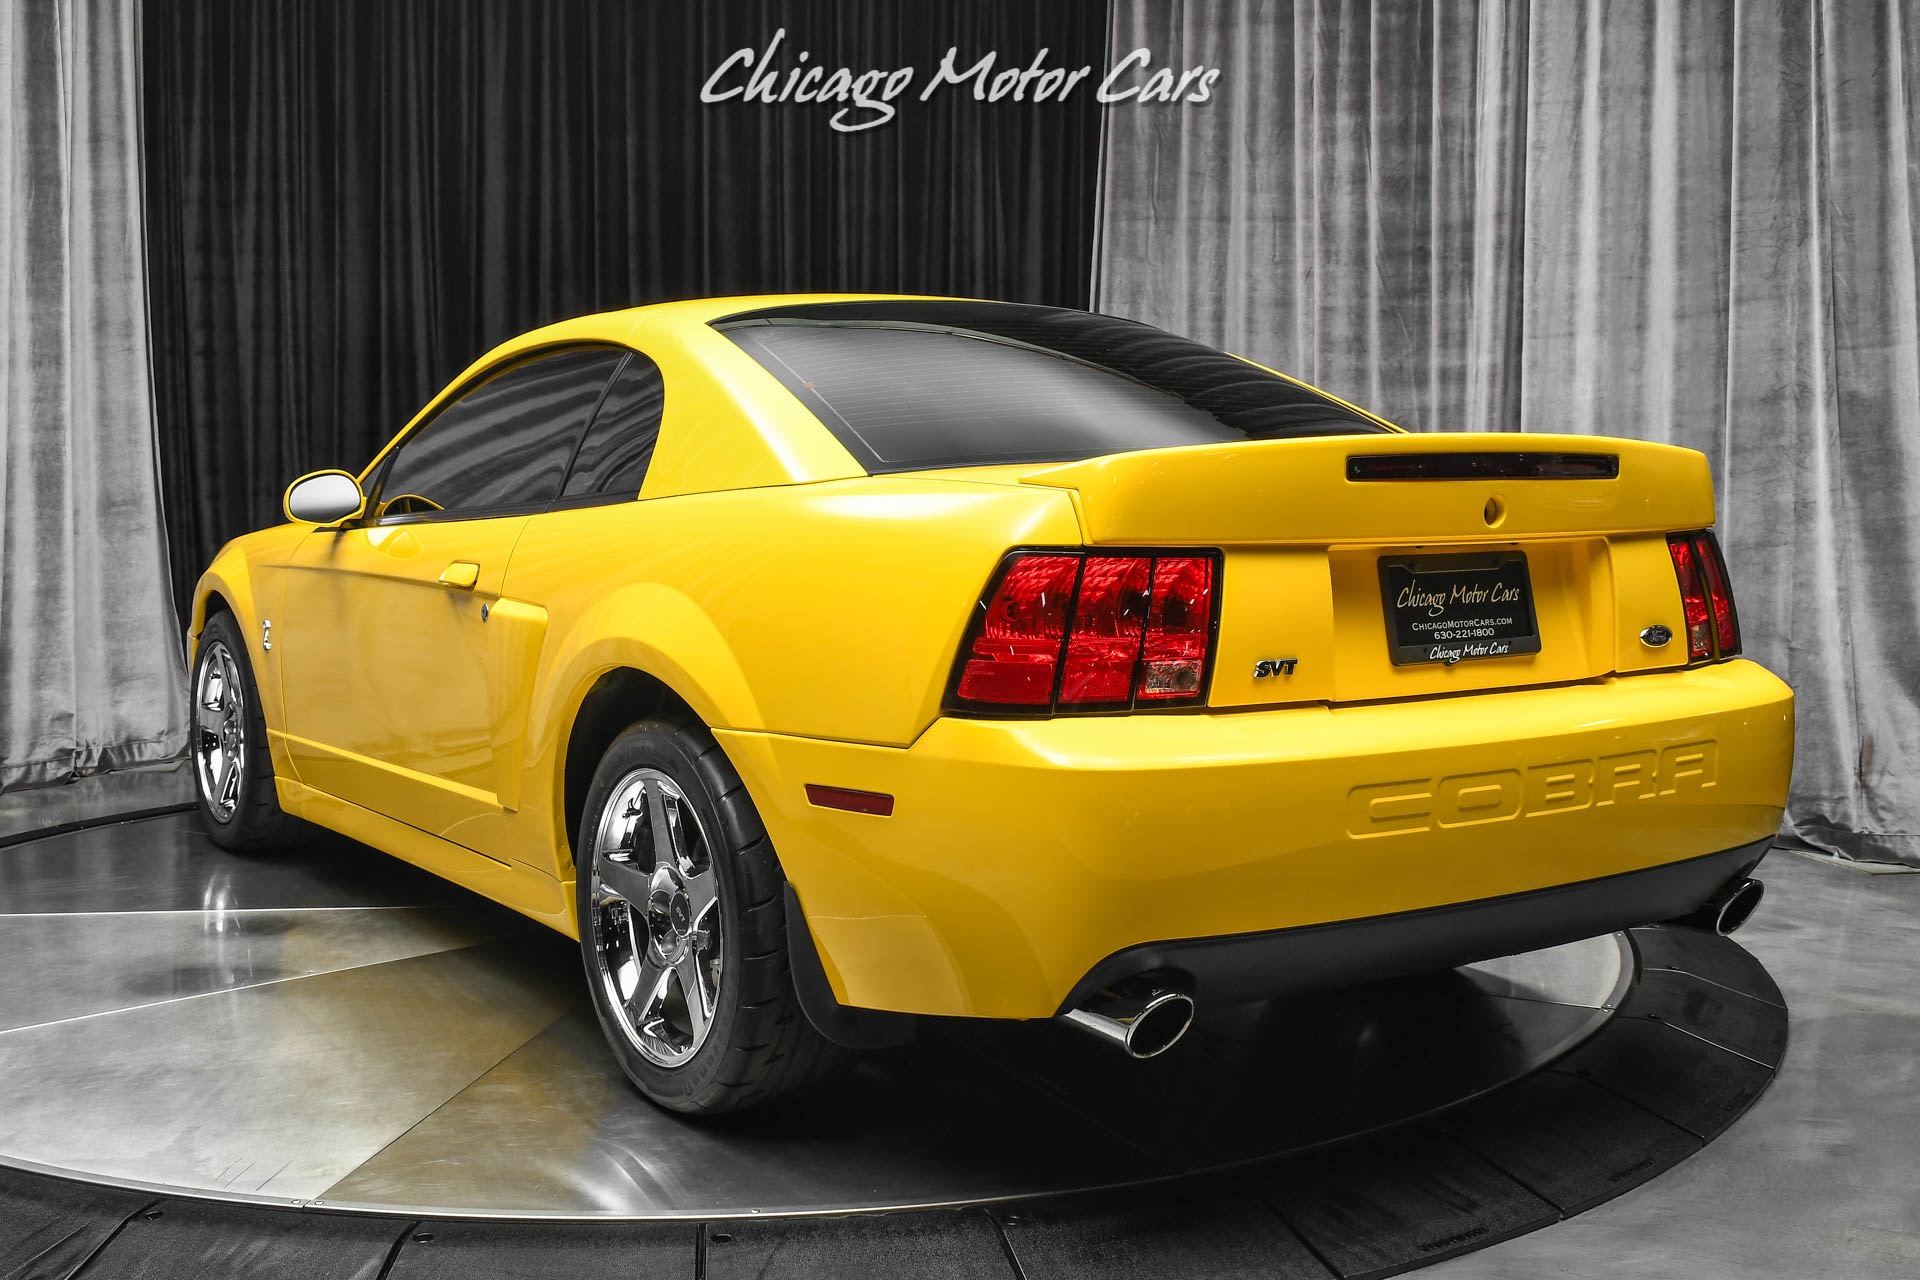 Used-2004-Ford-Mustang-SVT-Cobra-Coupe-SVT-ONLY-20K-MILES-TASTEFUL-MODS-COLLECTIBLE